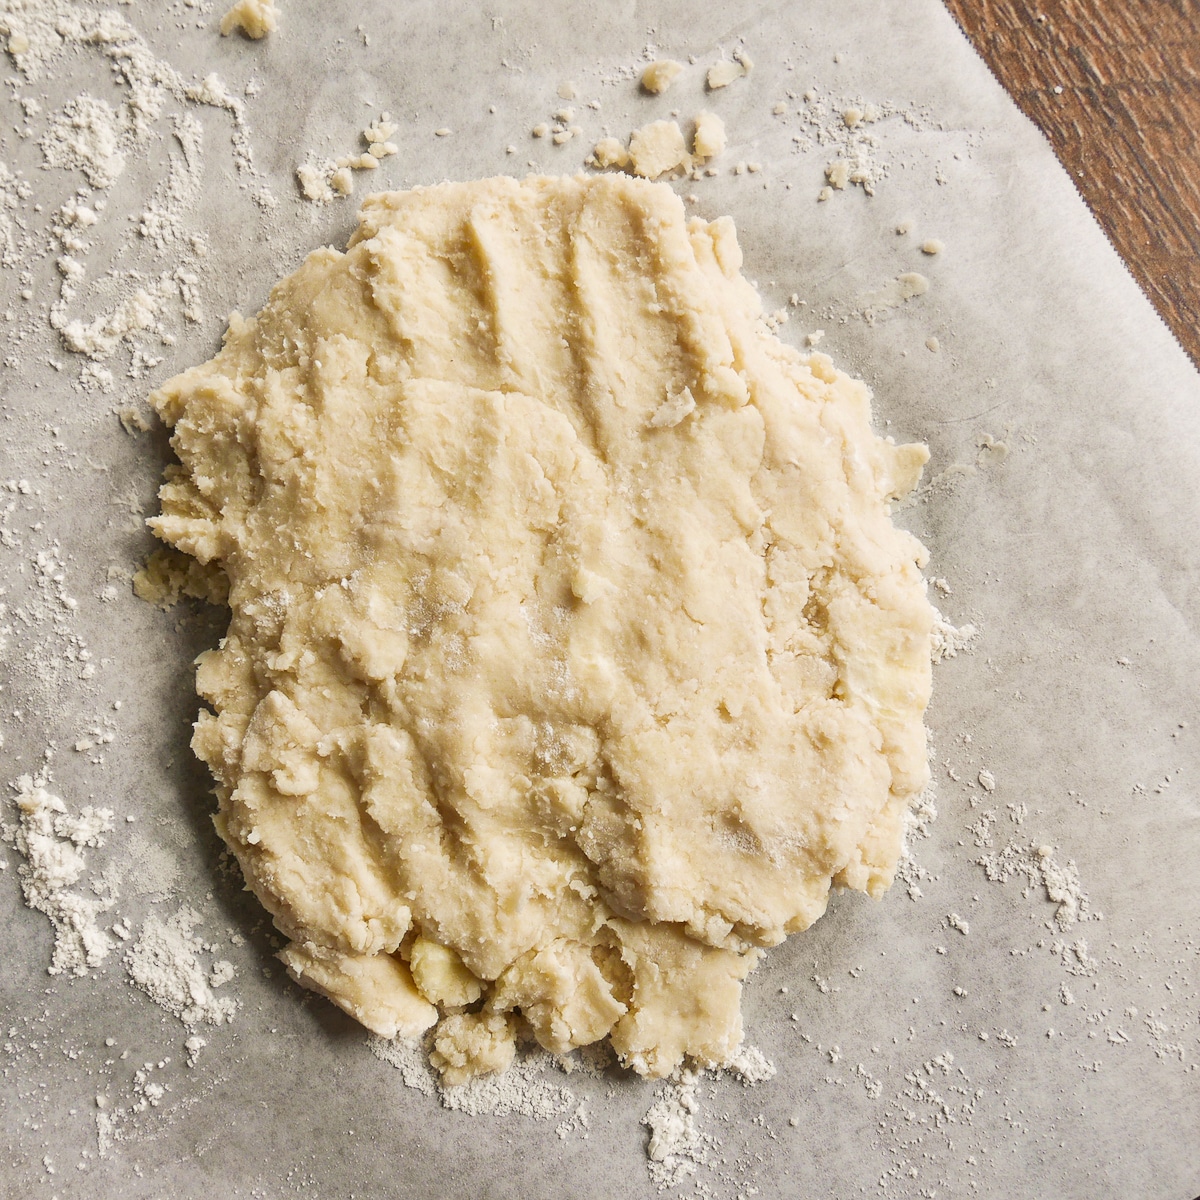 Kneaded galette dough on parchment paper.